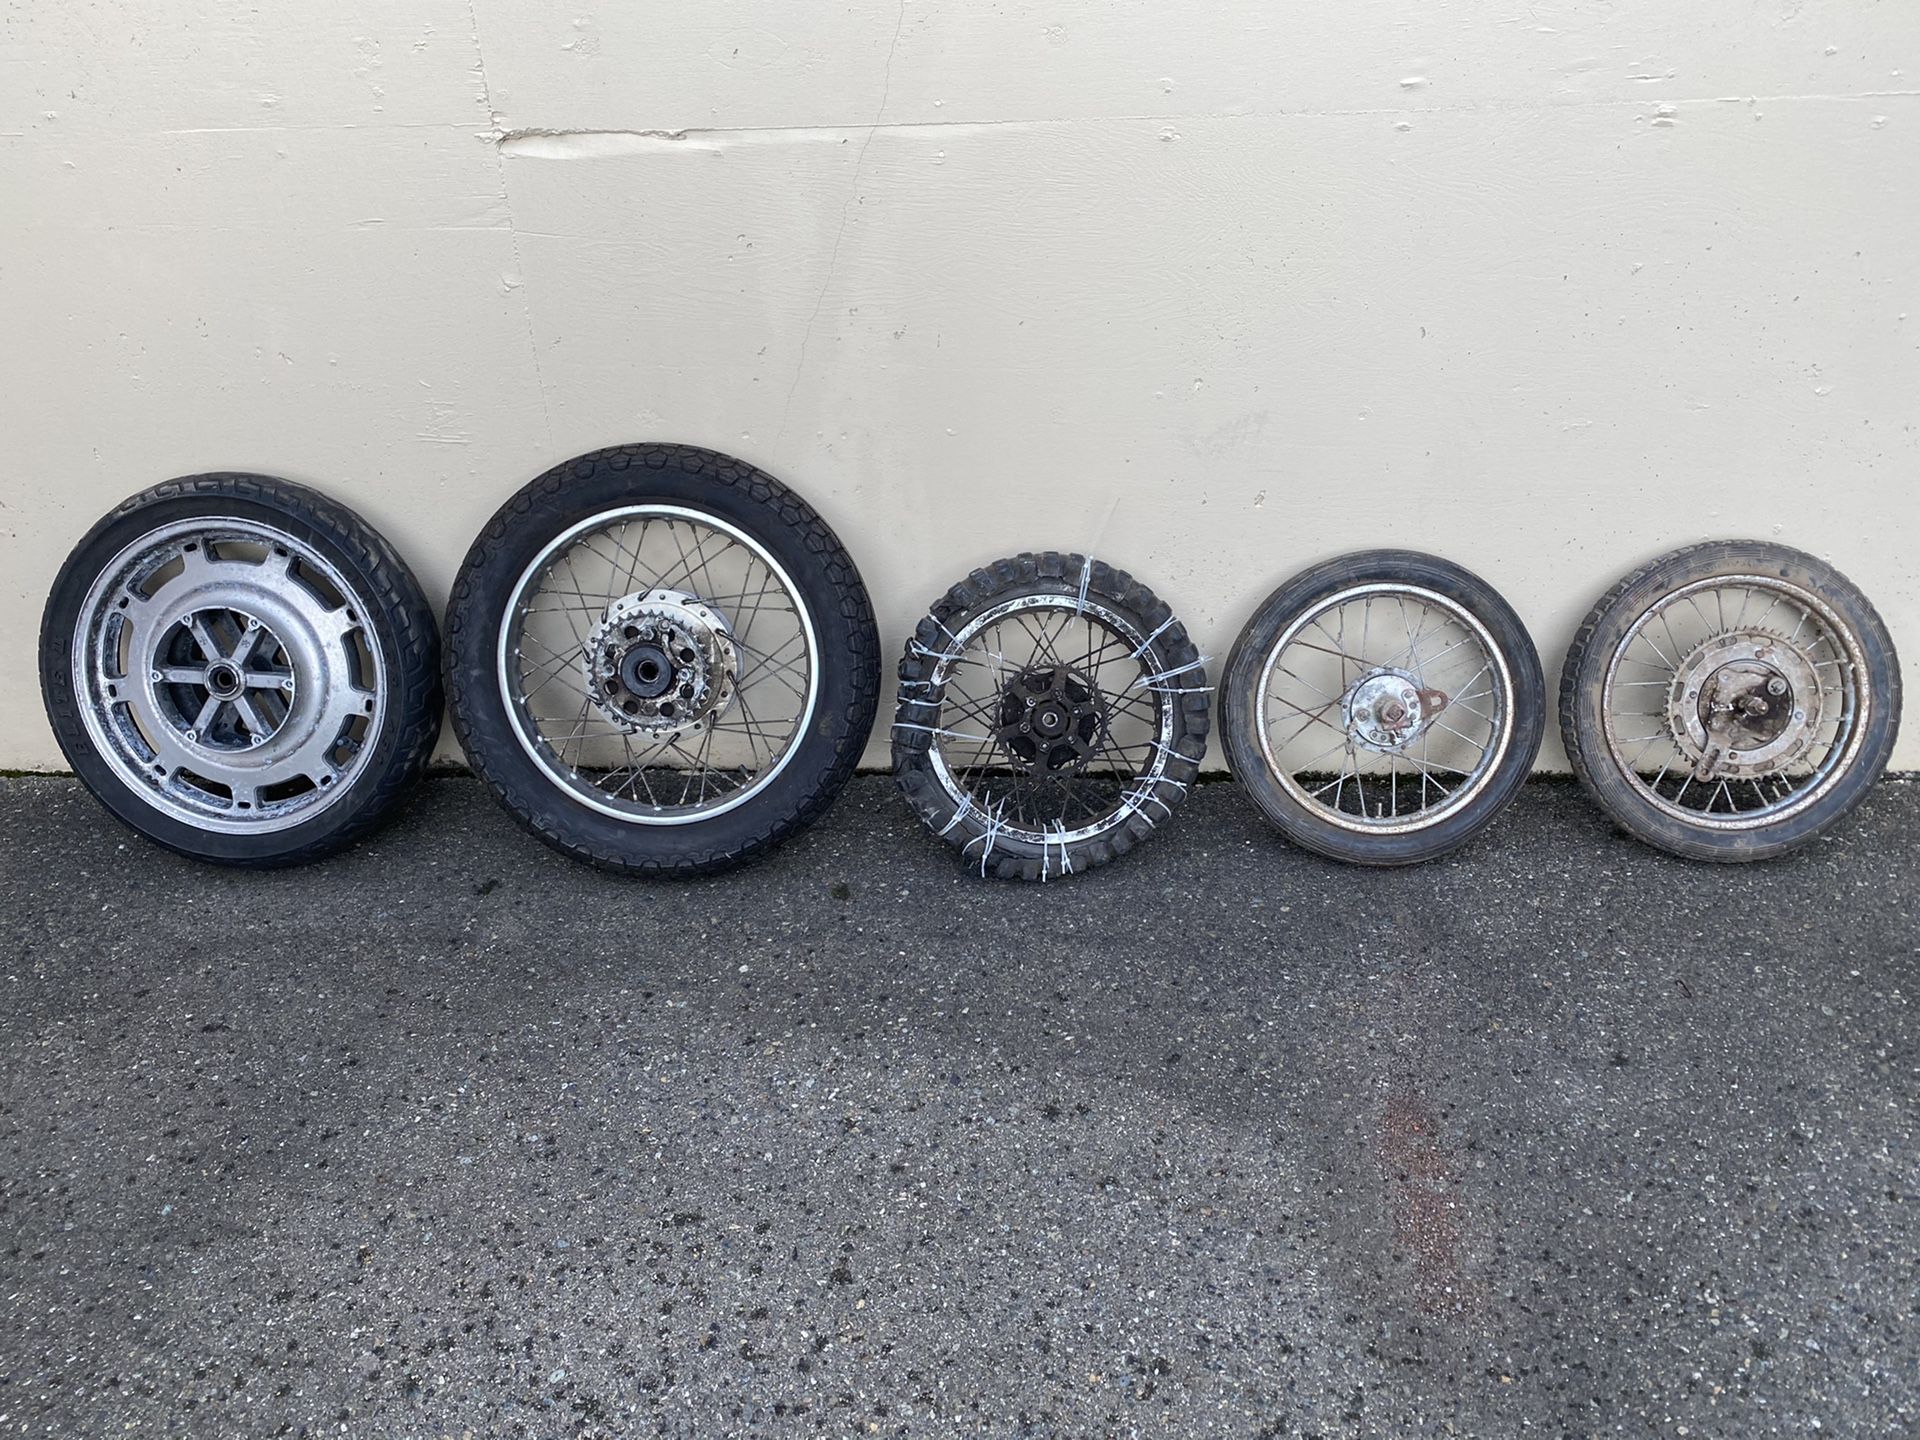 Motorcycle and Minibikes wheels FREE!